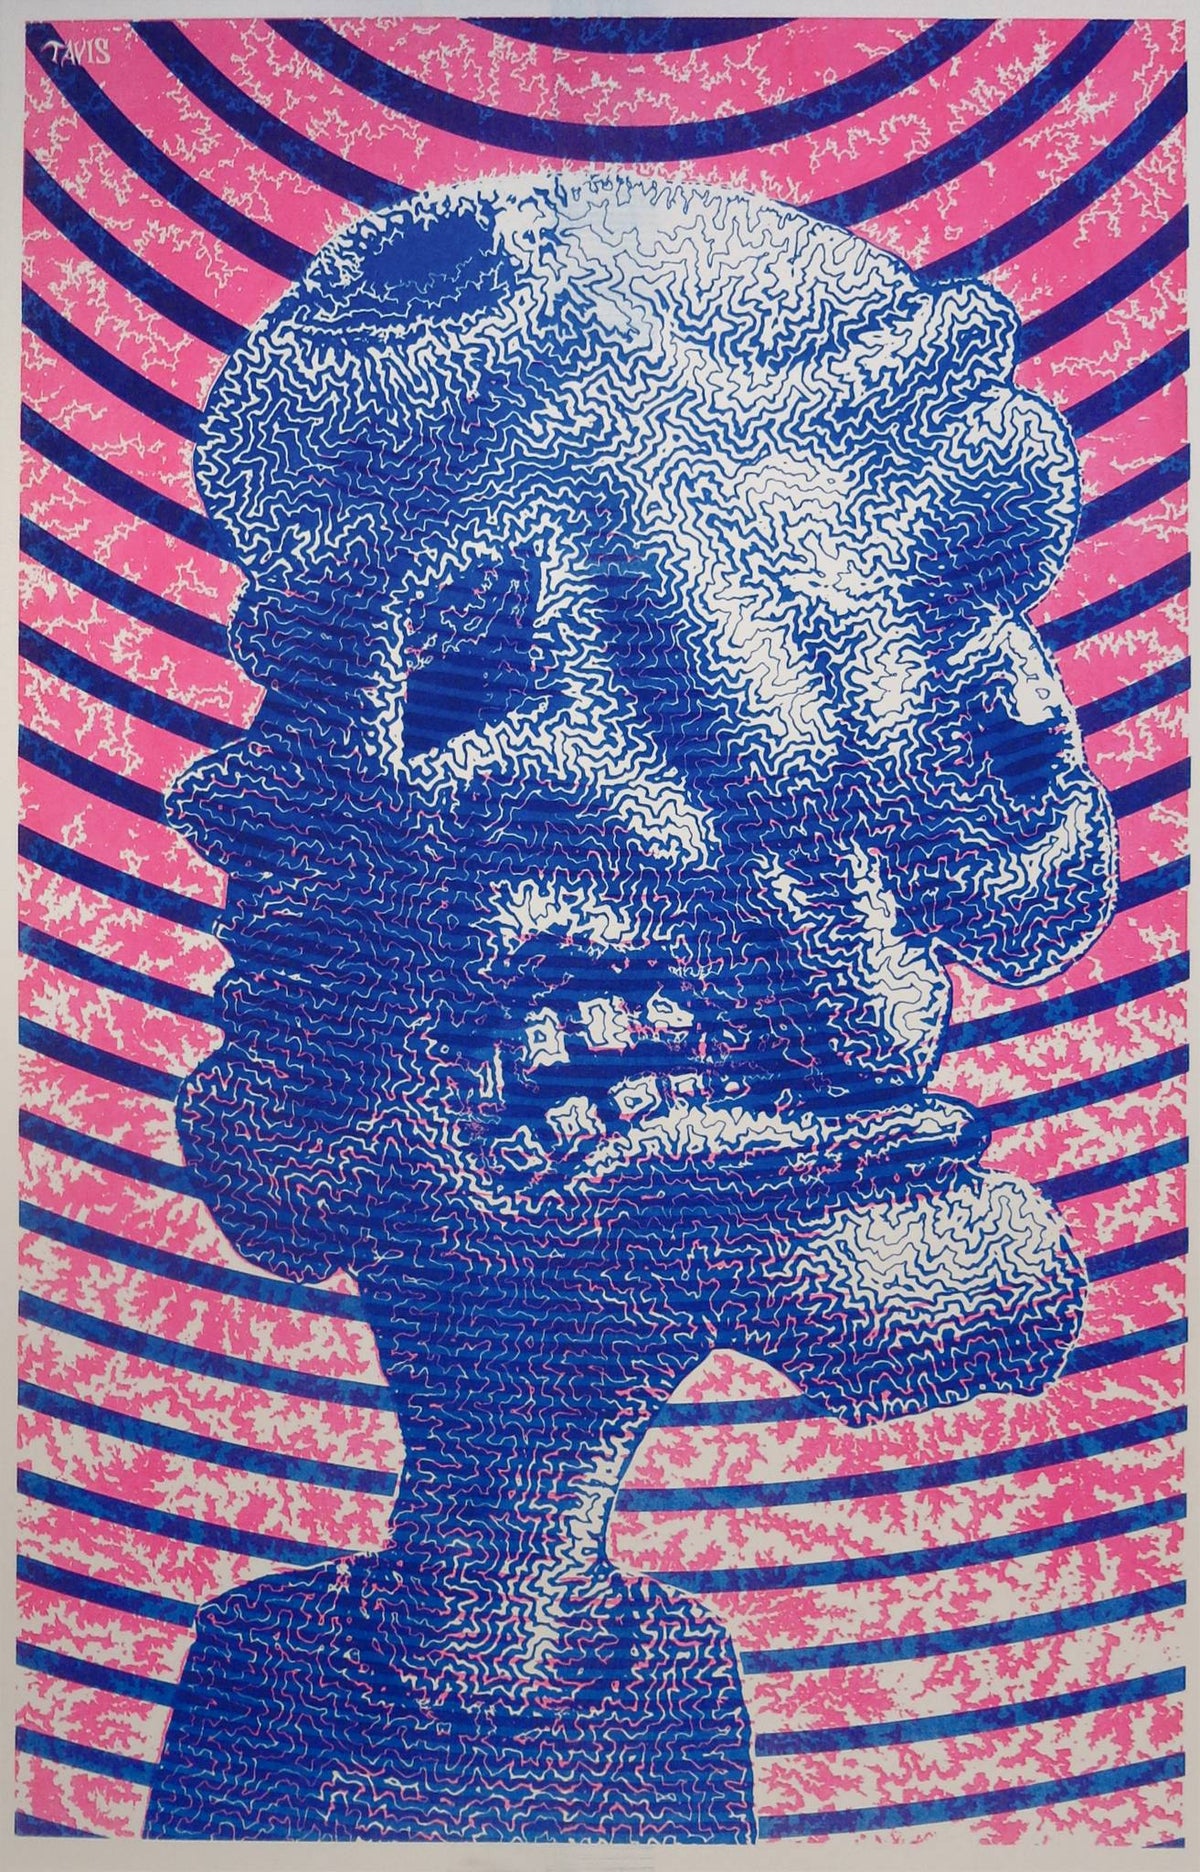 "The Excorcist" 2-color risograph print on 11 x 17 paper, limited edition of 100